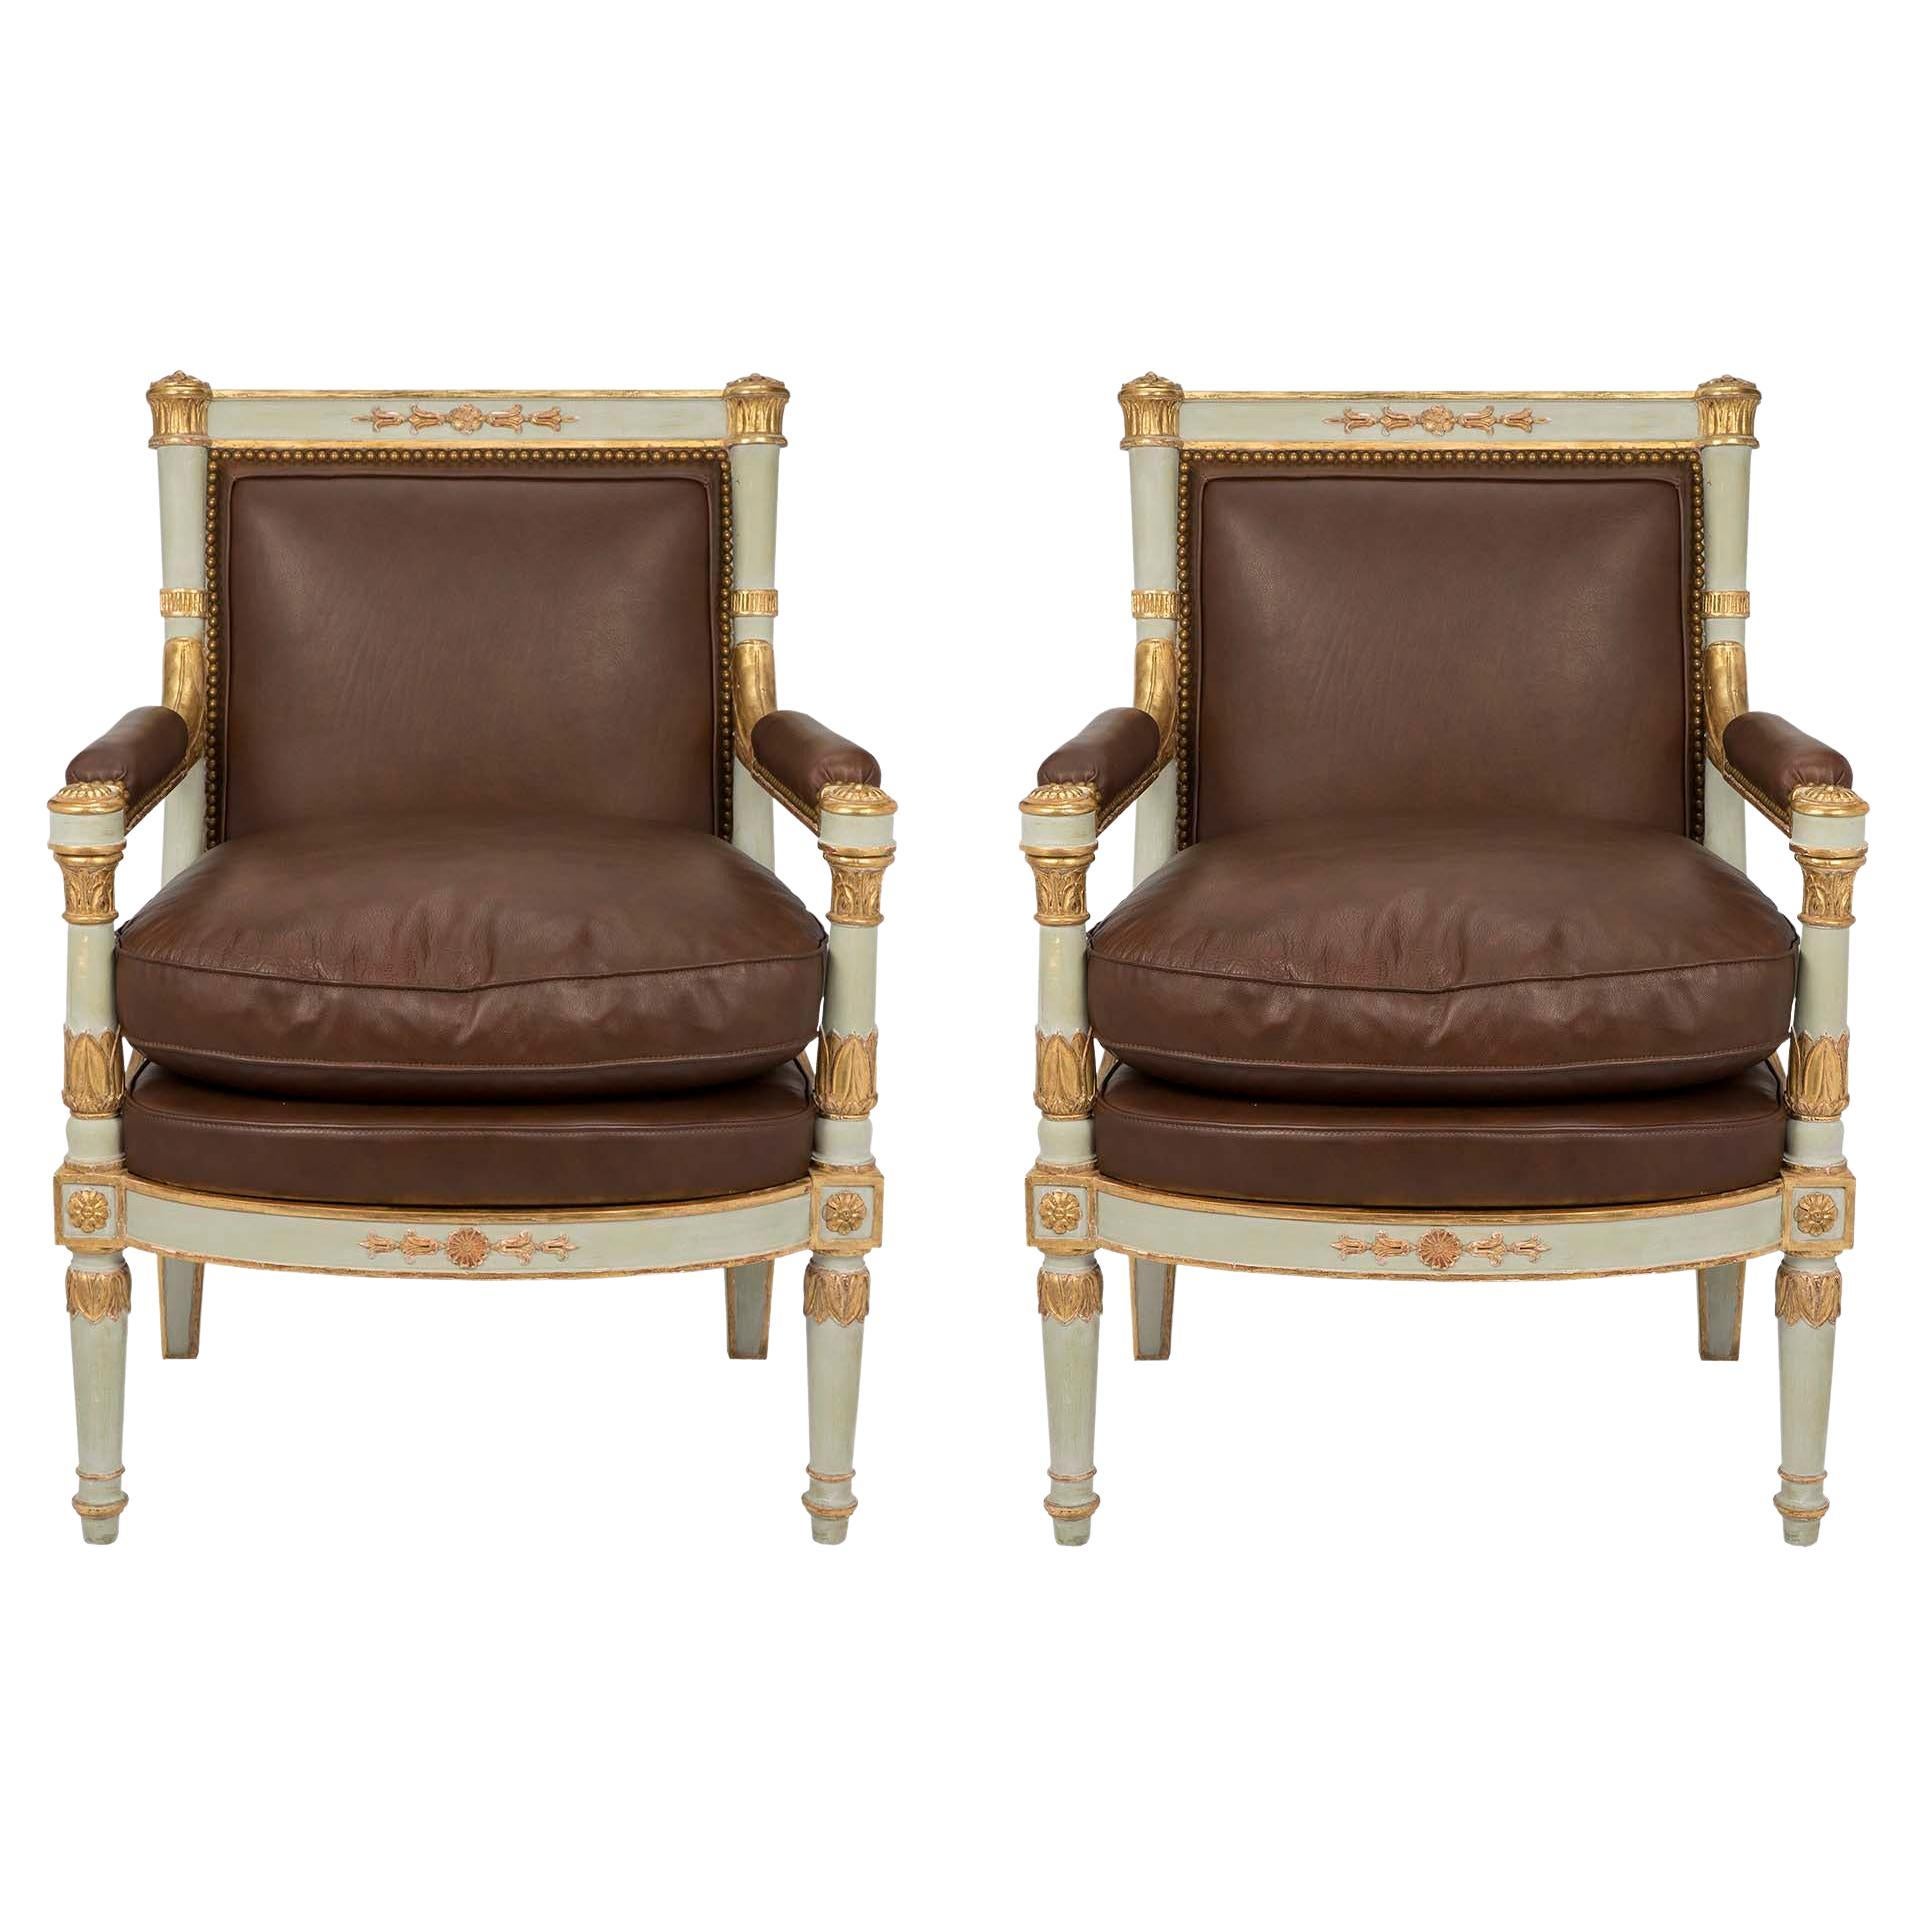 Pair of Italian Early 19th Century Neoclassical Style Armchairs